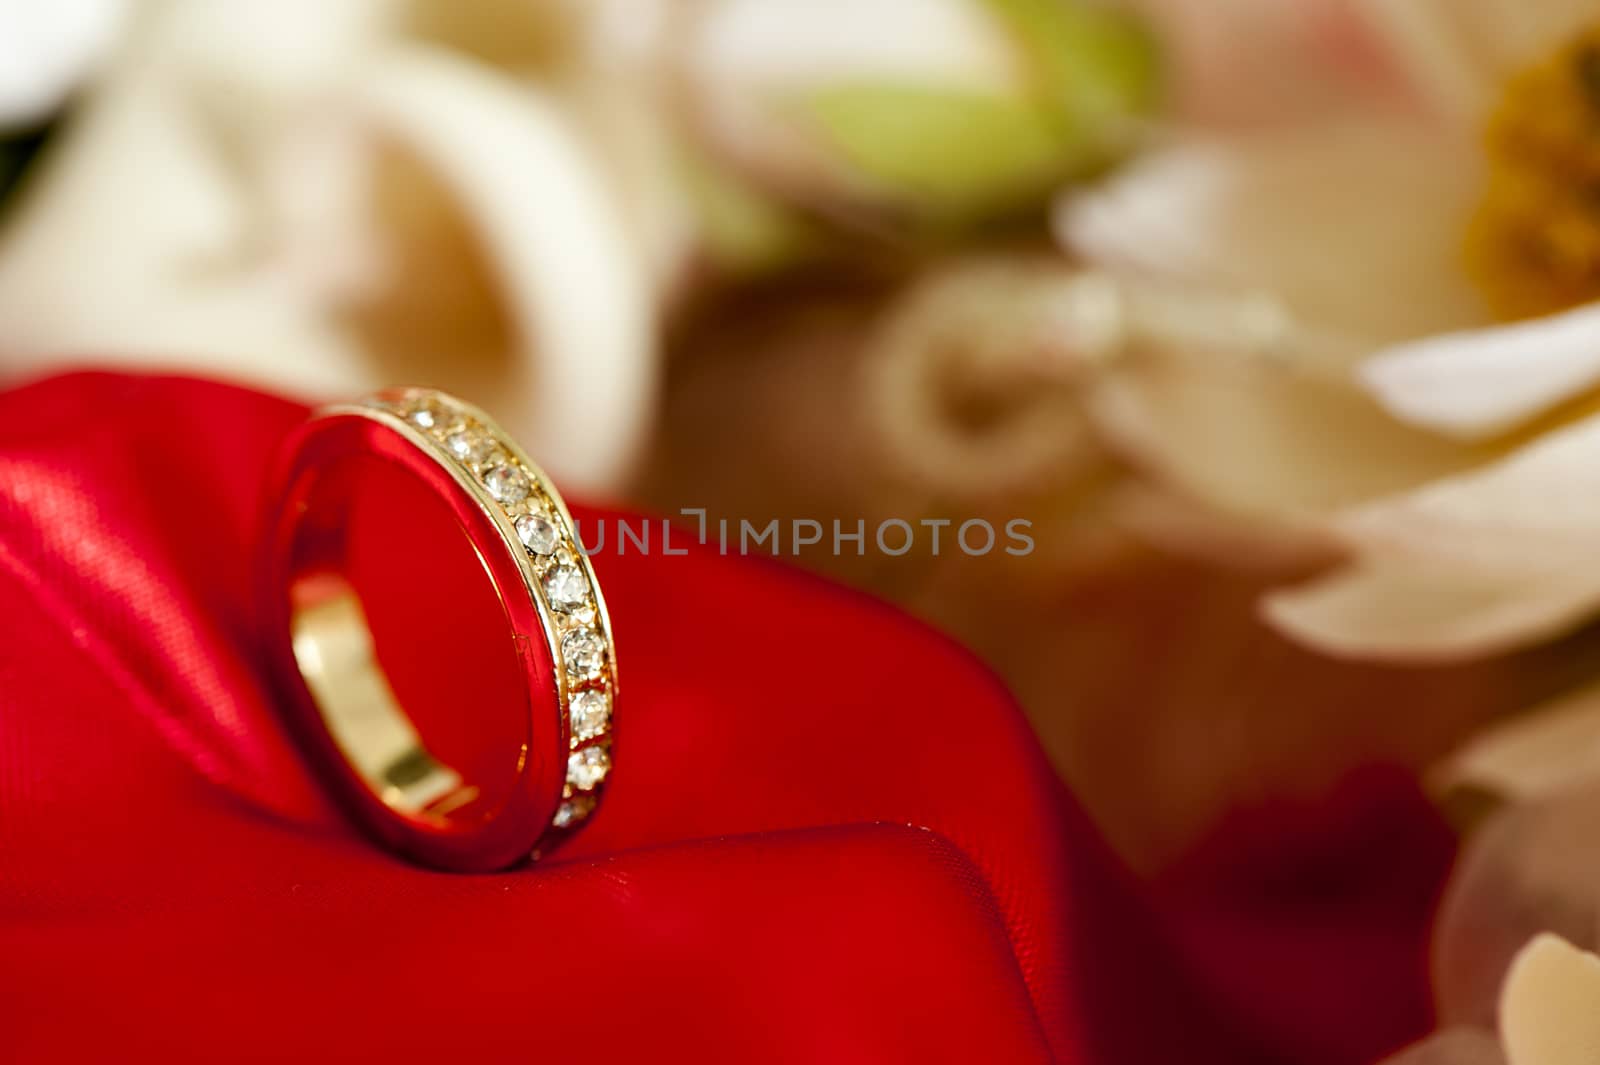  wedding rings on colorful fabric  by carla720